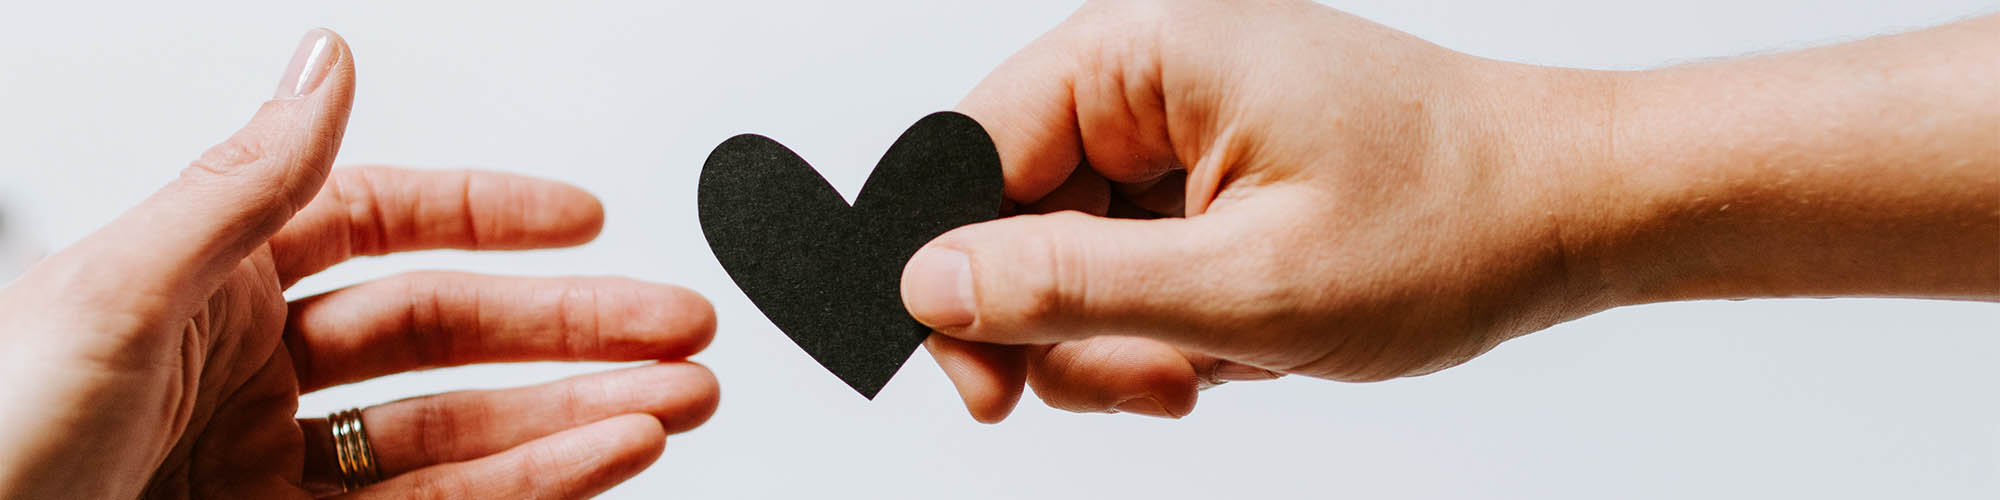 One Hand Giving Black Paper Heart to Second Hand